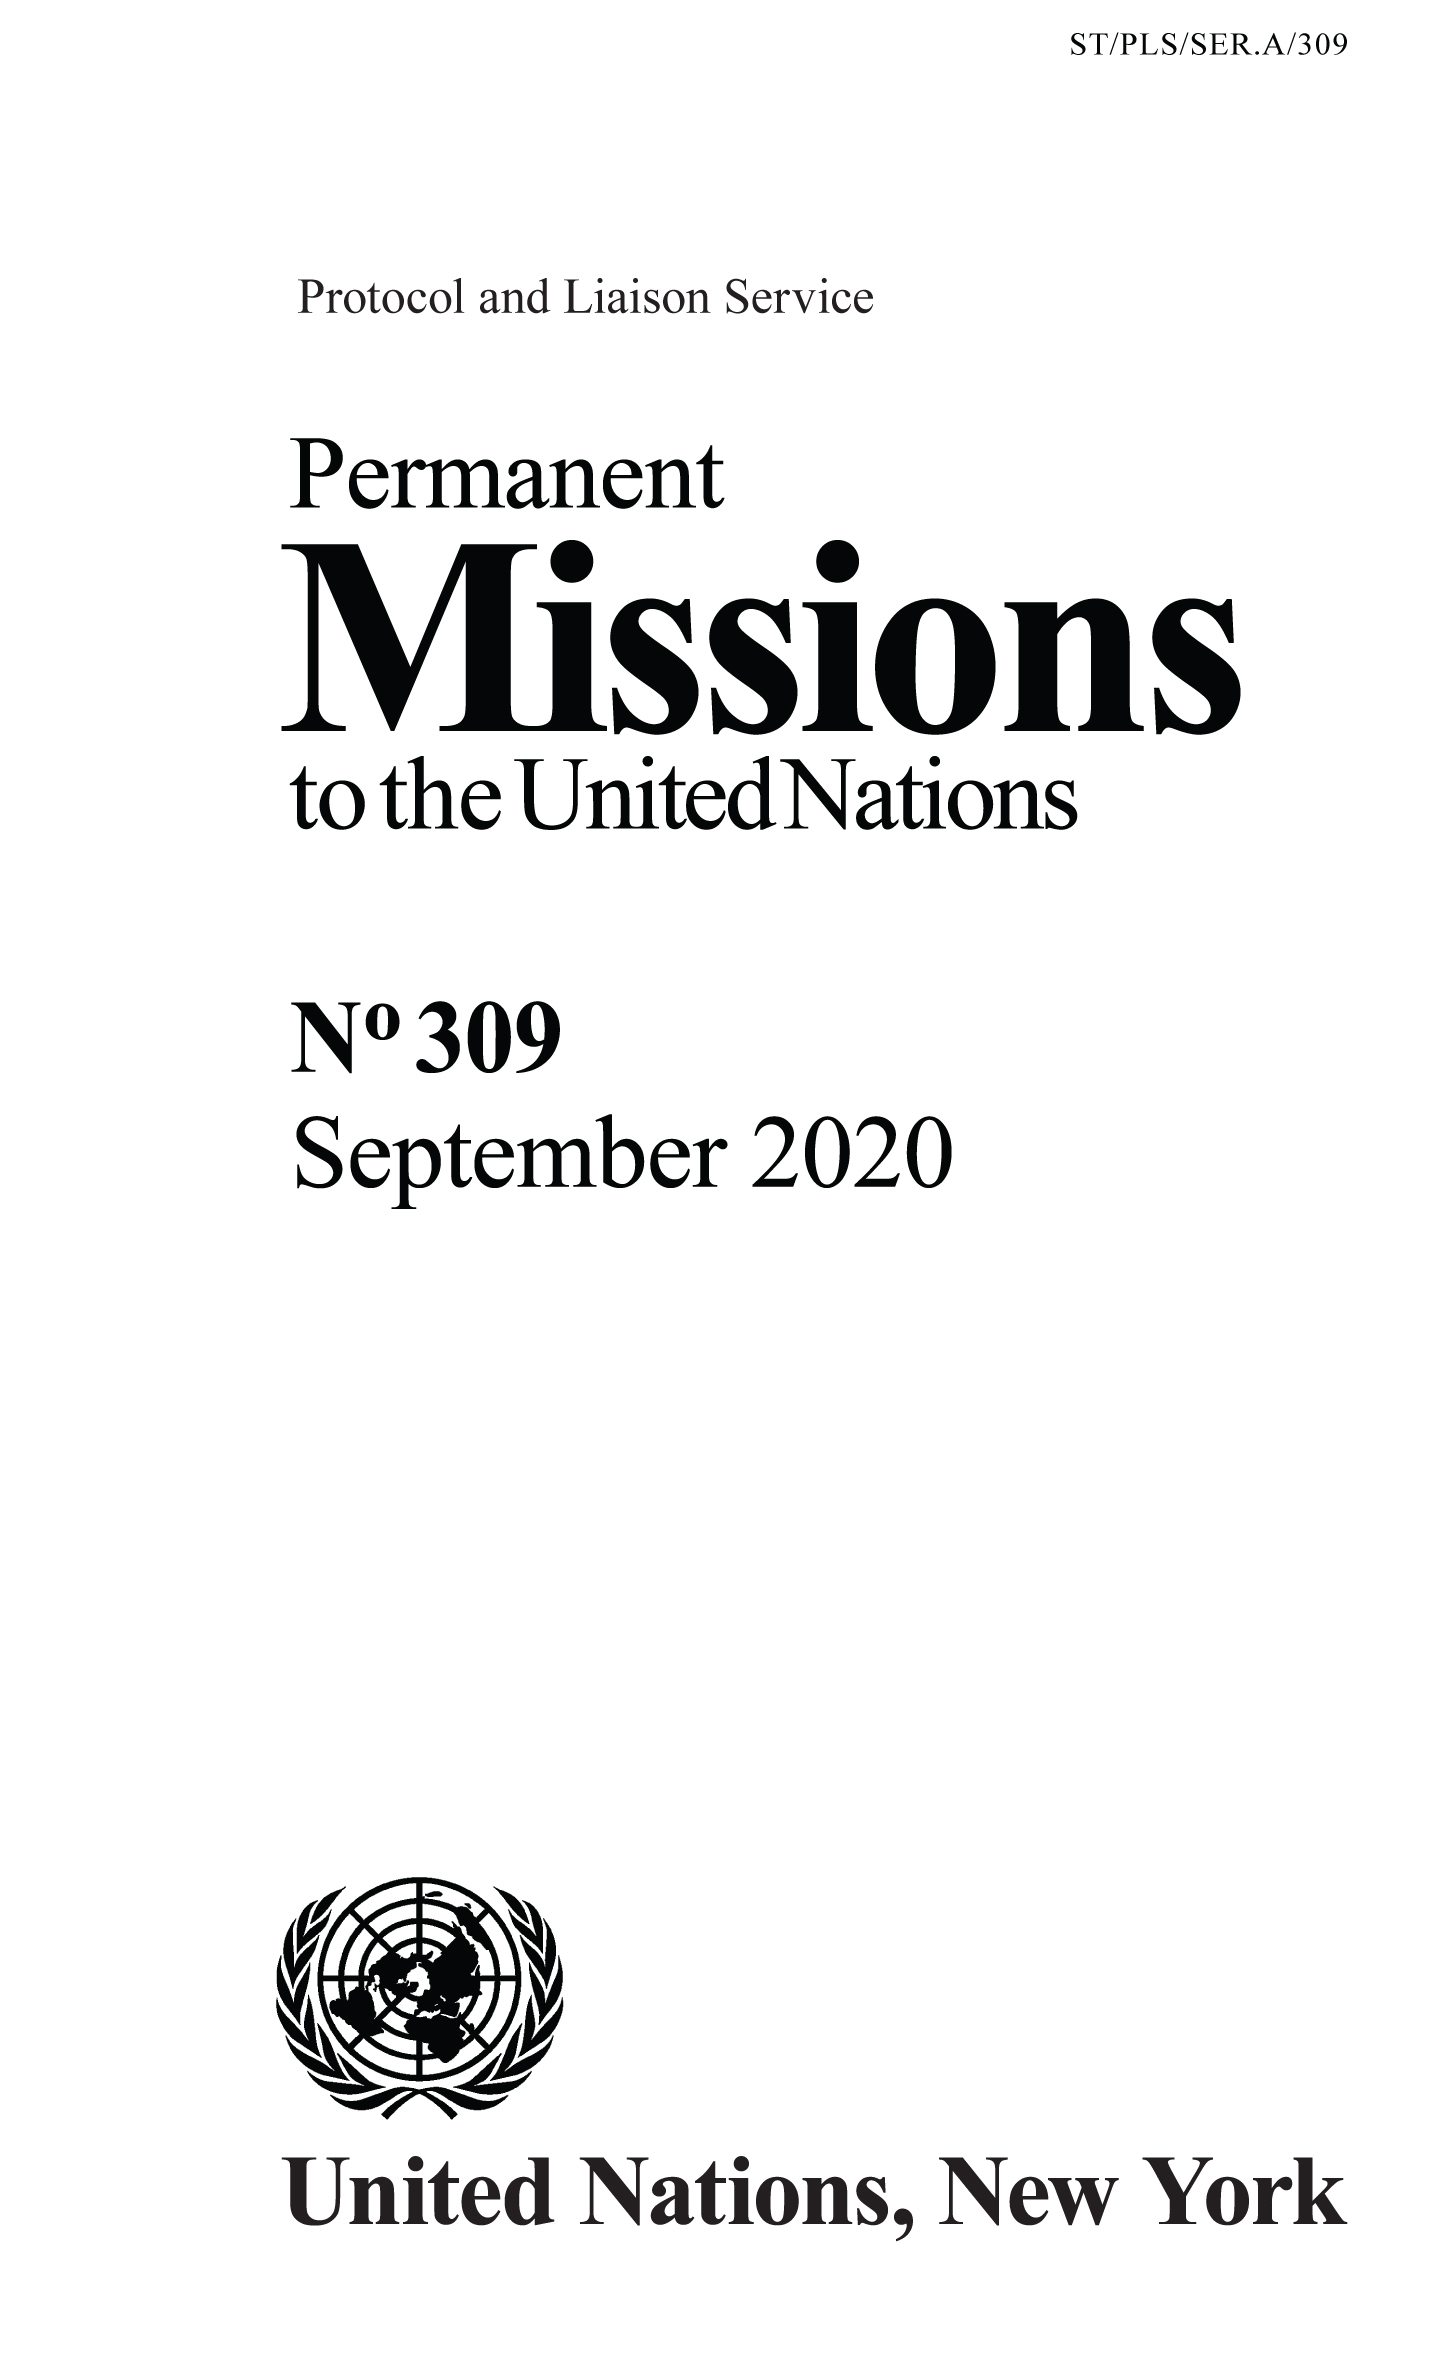 image of Permanent Missions to the United Nations, No. 309